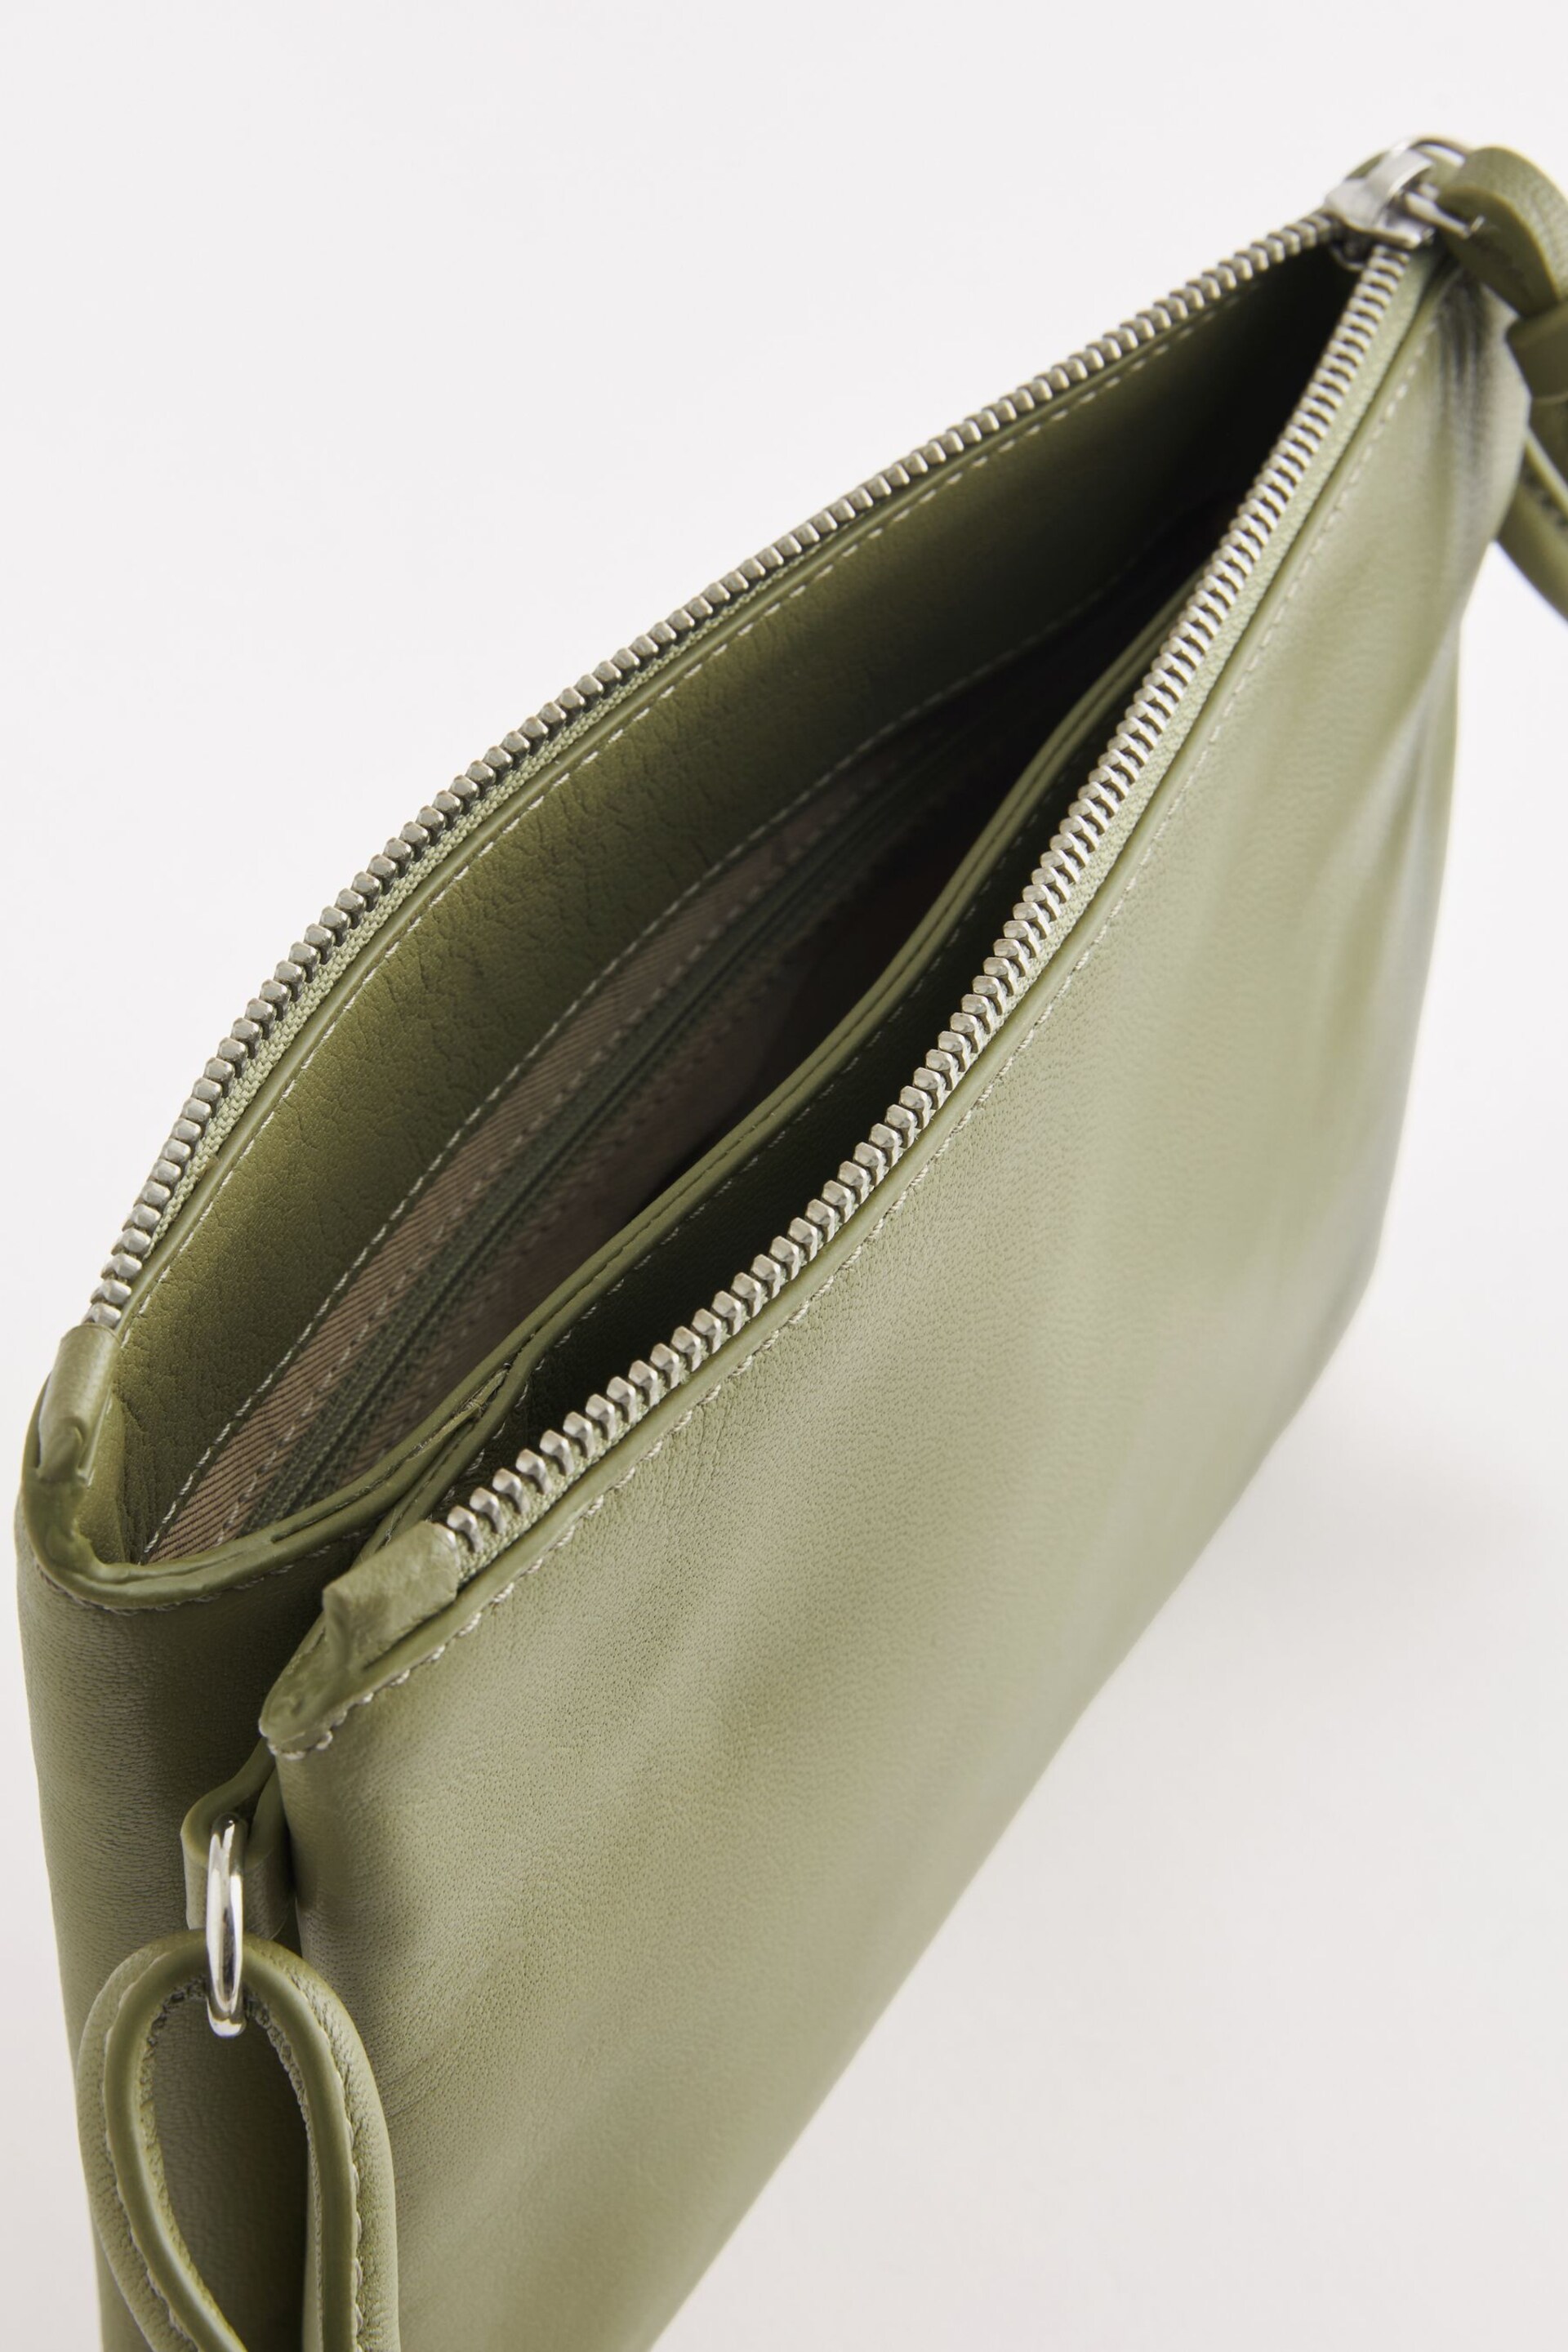 Sage Green Leather Cross-Body Bag - Image 7 of 7